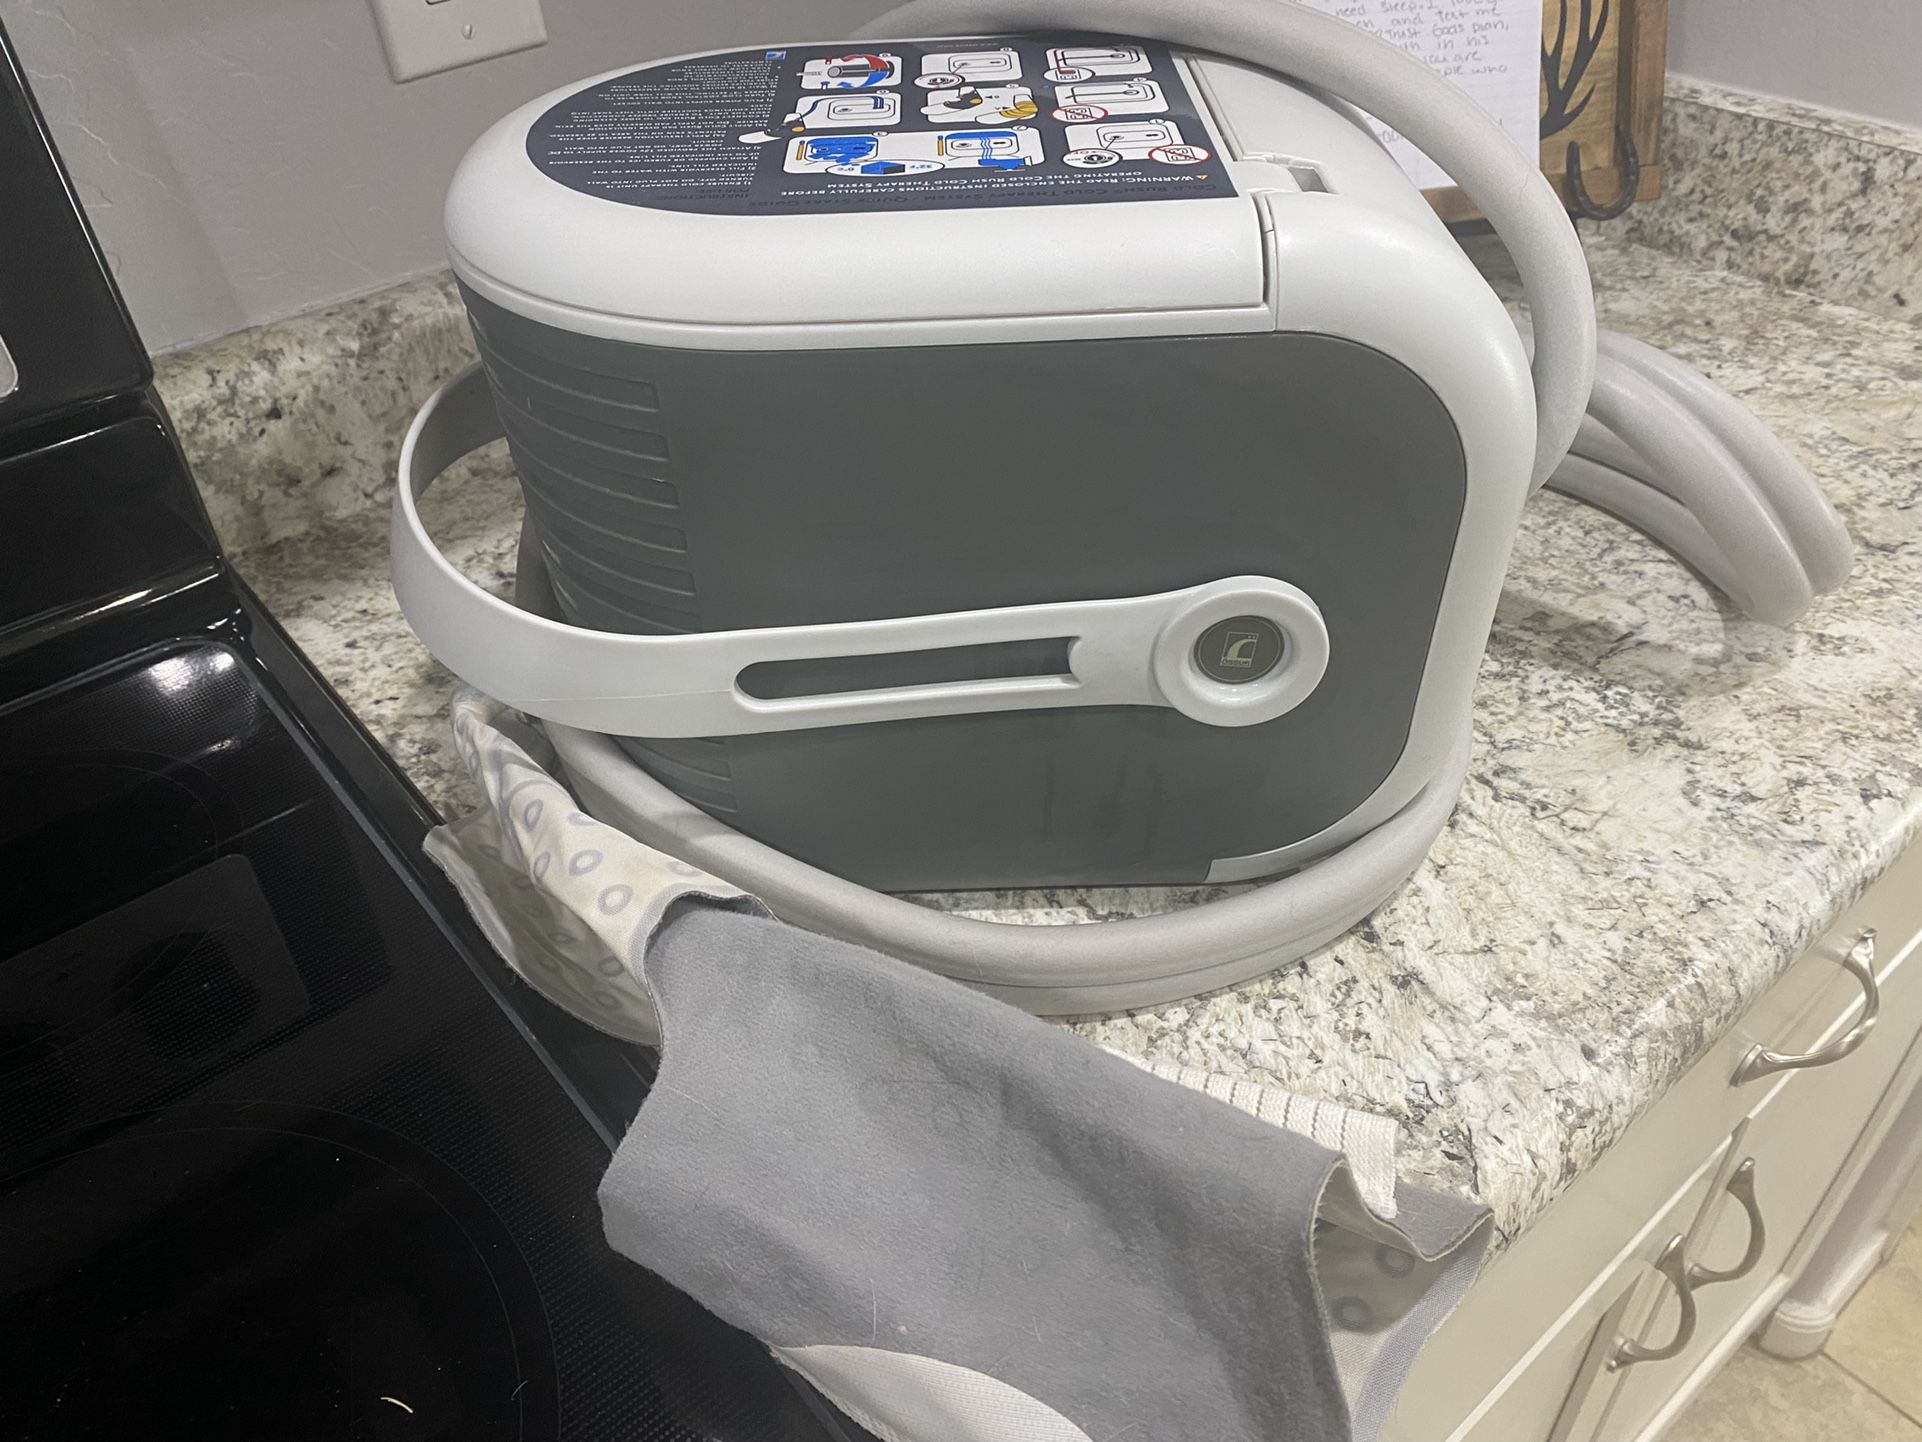 ice box circulation machine for post surgery or general icing purposes